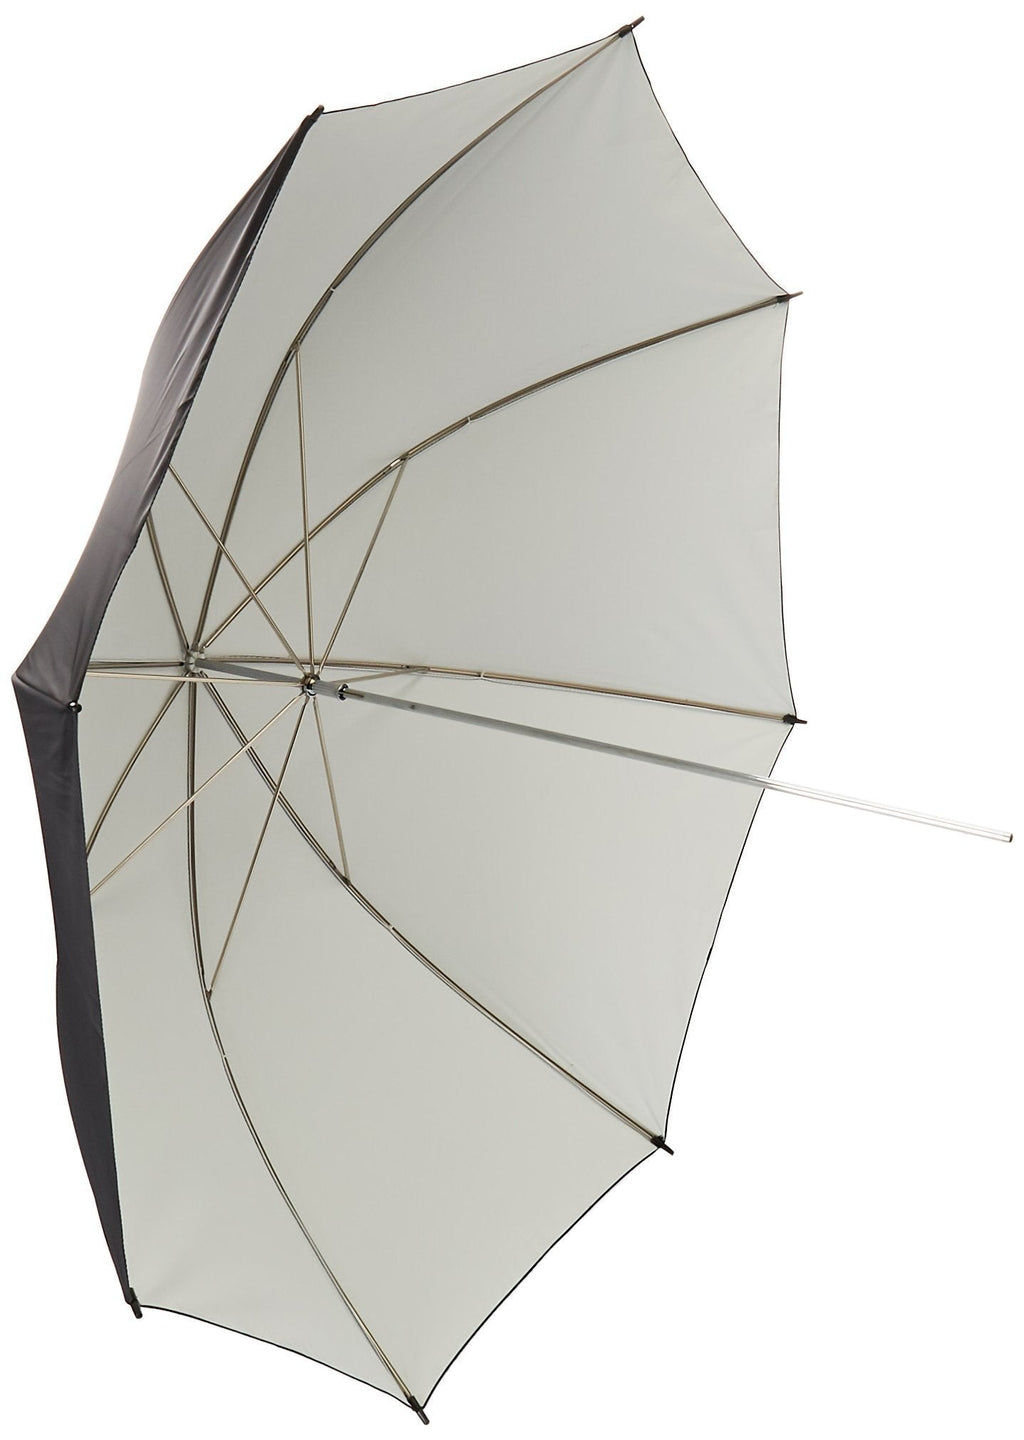 CowboyStudio 40-Inch Black and White Umbrella for Photography and Video Lighting Reflective 40 inch